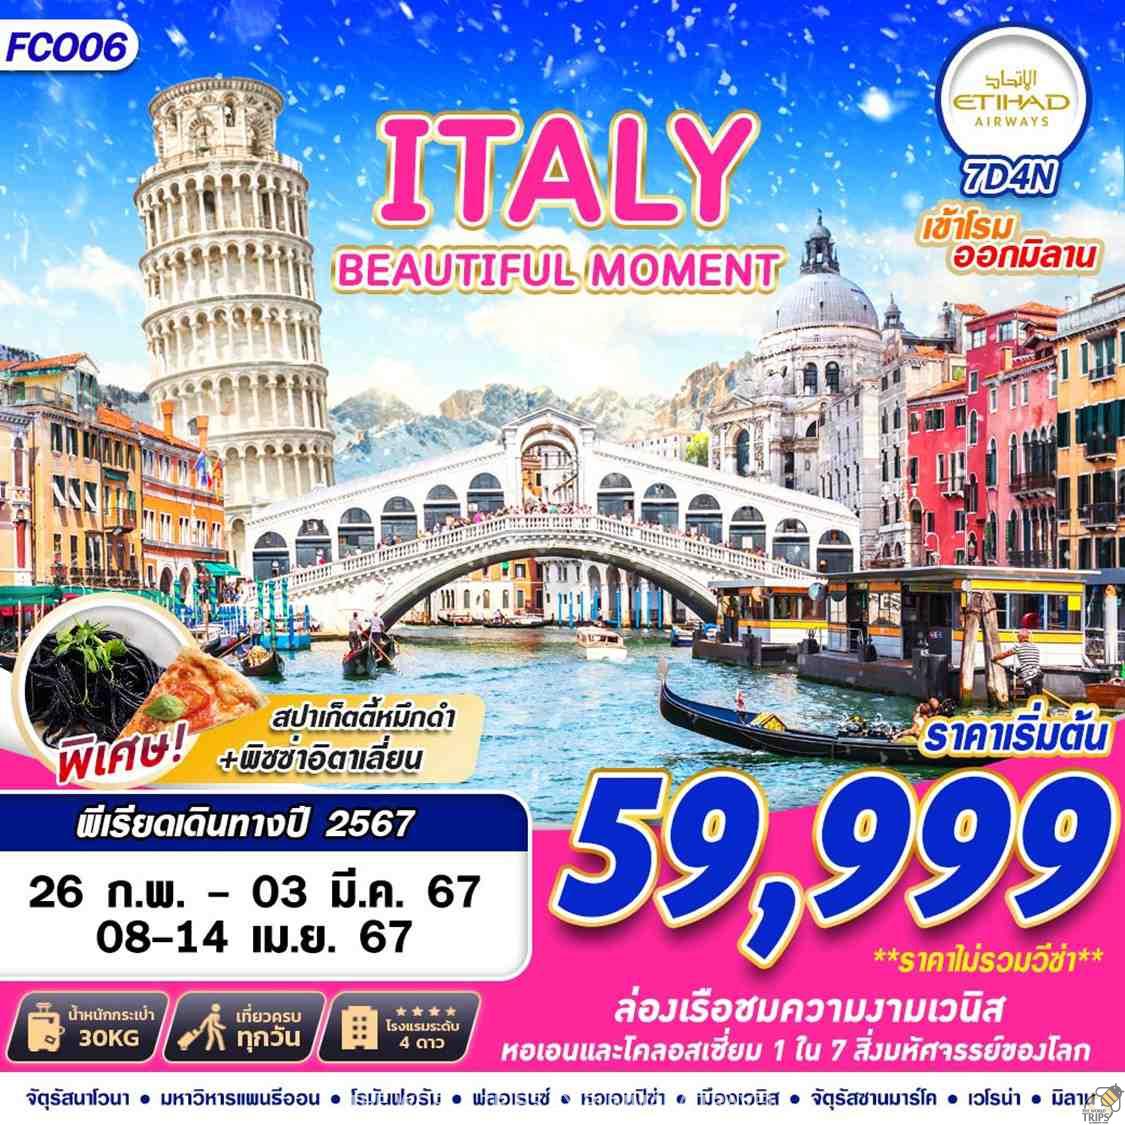 WTPT0551 : ITALY BEAUTIFUL MOMENT 7D4N BY EY